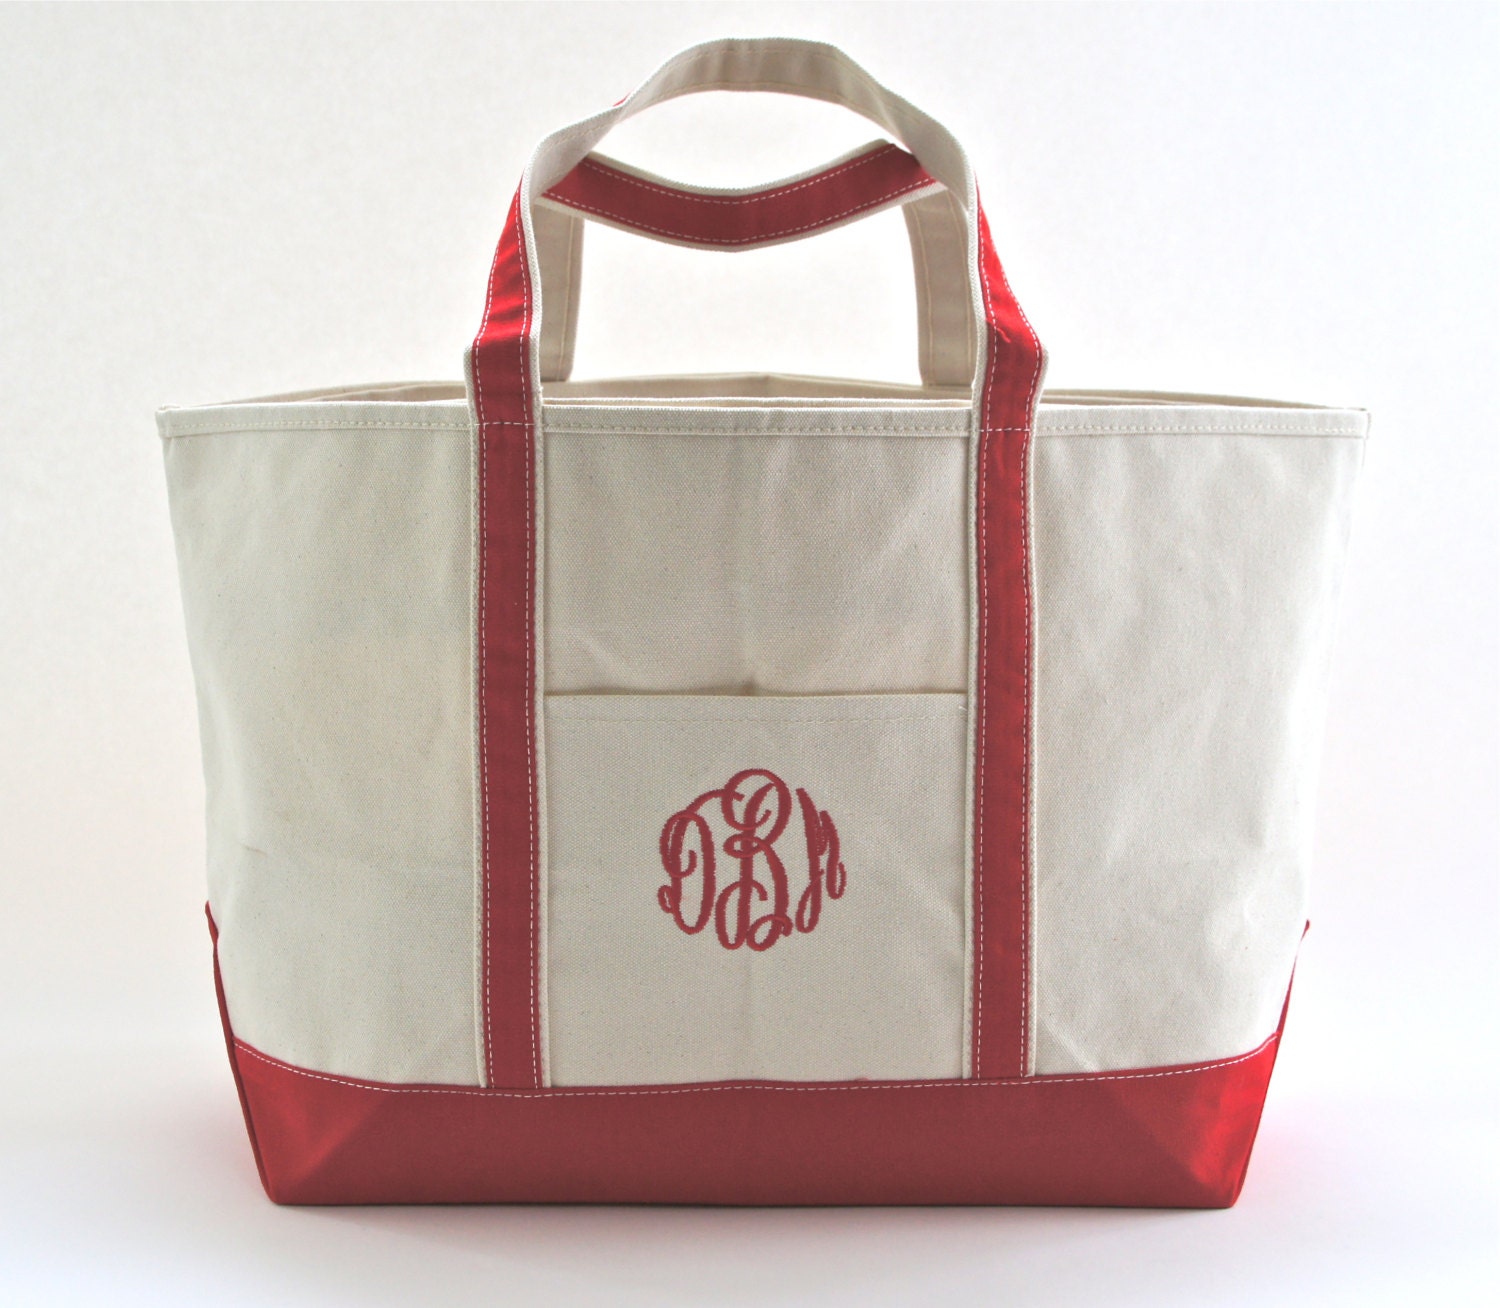 Tote Bag with Initials